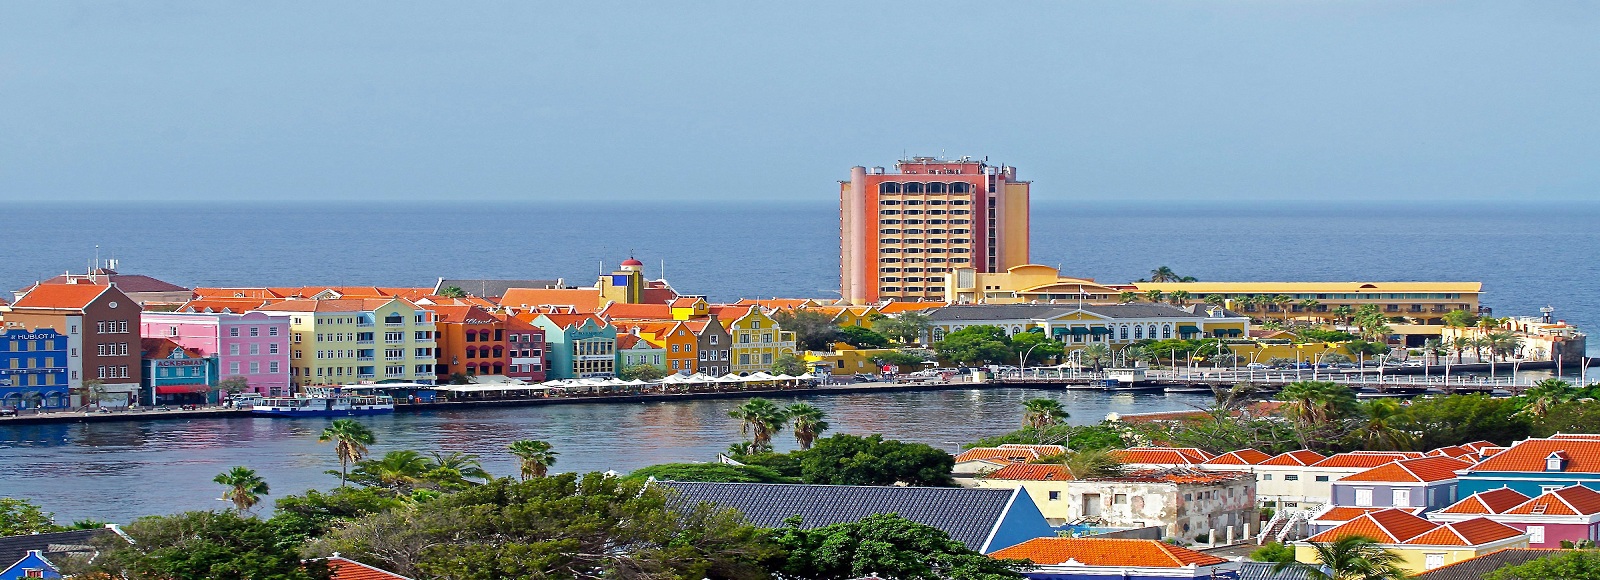 Transfer Offers in Willemstad. Low Cost Transfers in  Willemstad 